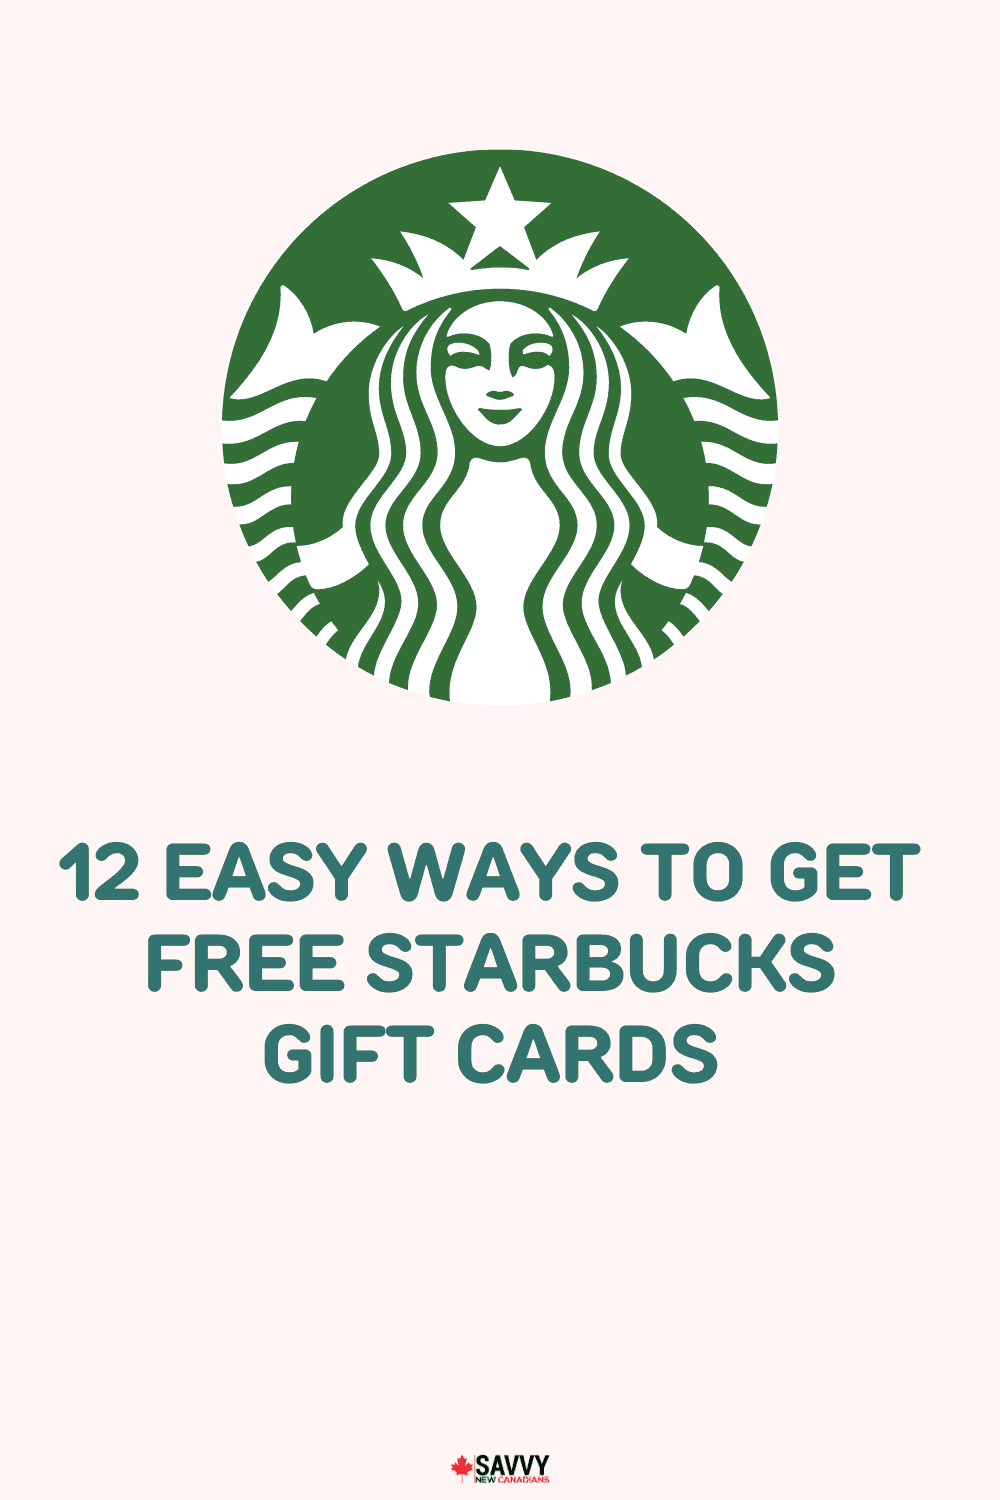 12 Easy Ways To Get Free Starbucks Gift Cards in 2022